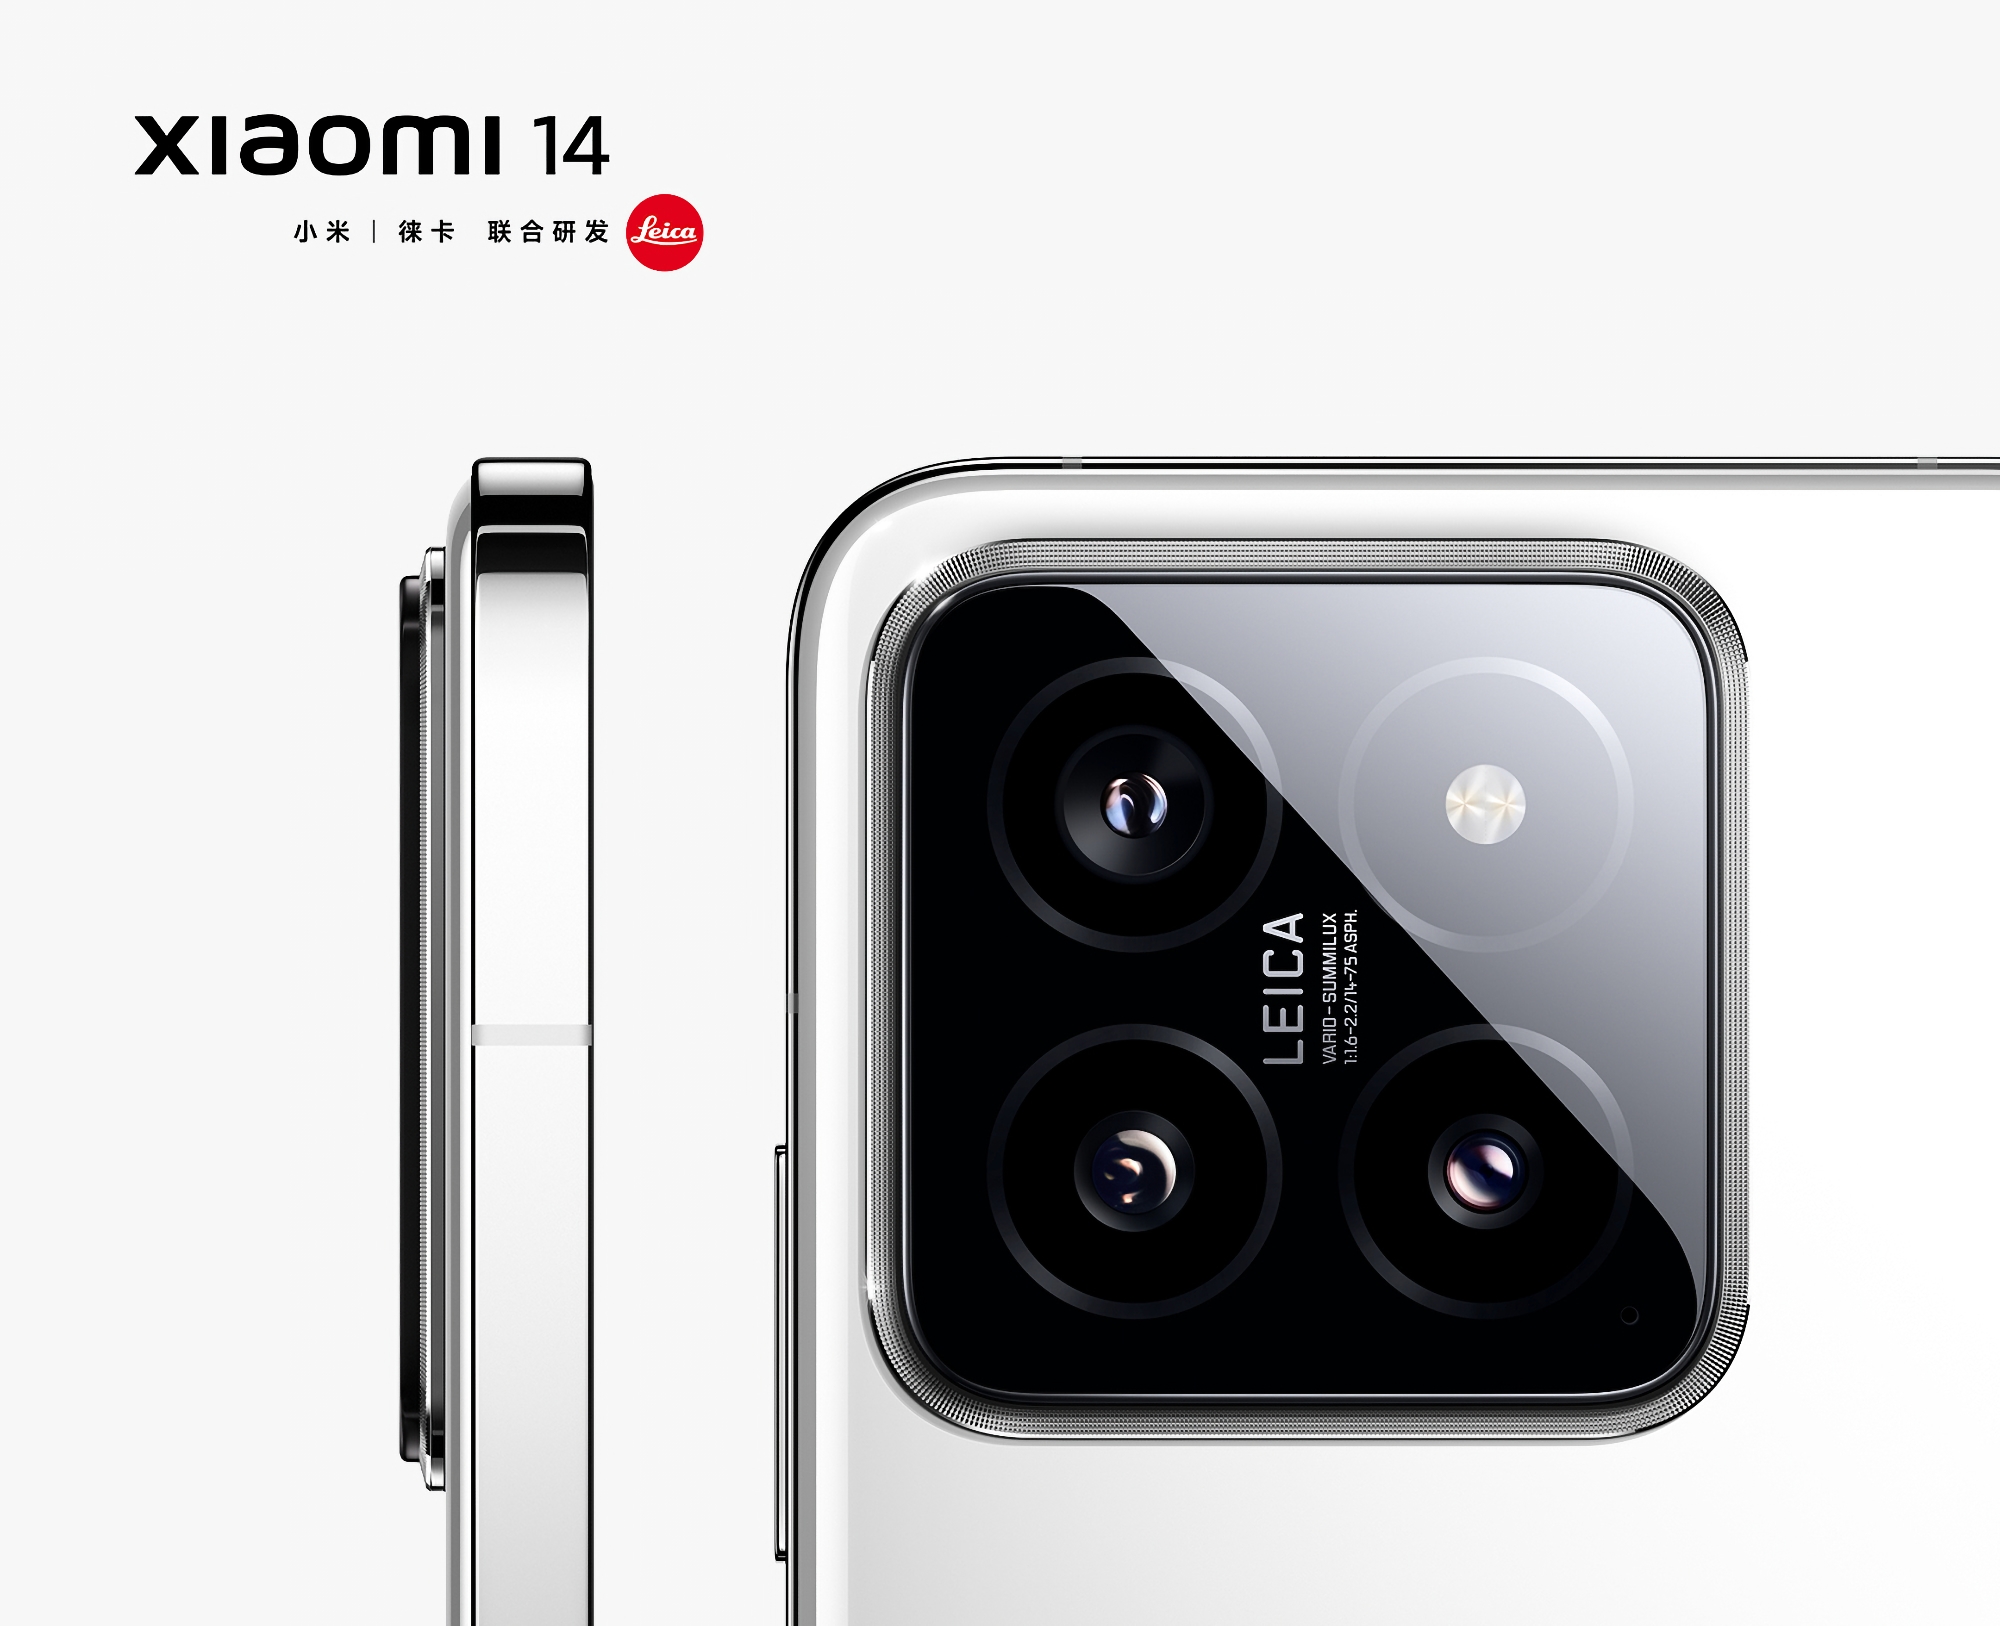 Not waiting for the announcement: Xiaomi has revealed high-quality images of the Xiaomi 14 flagship